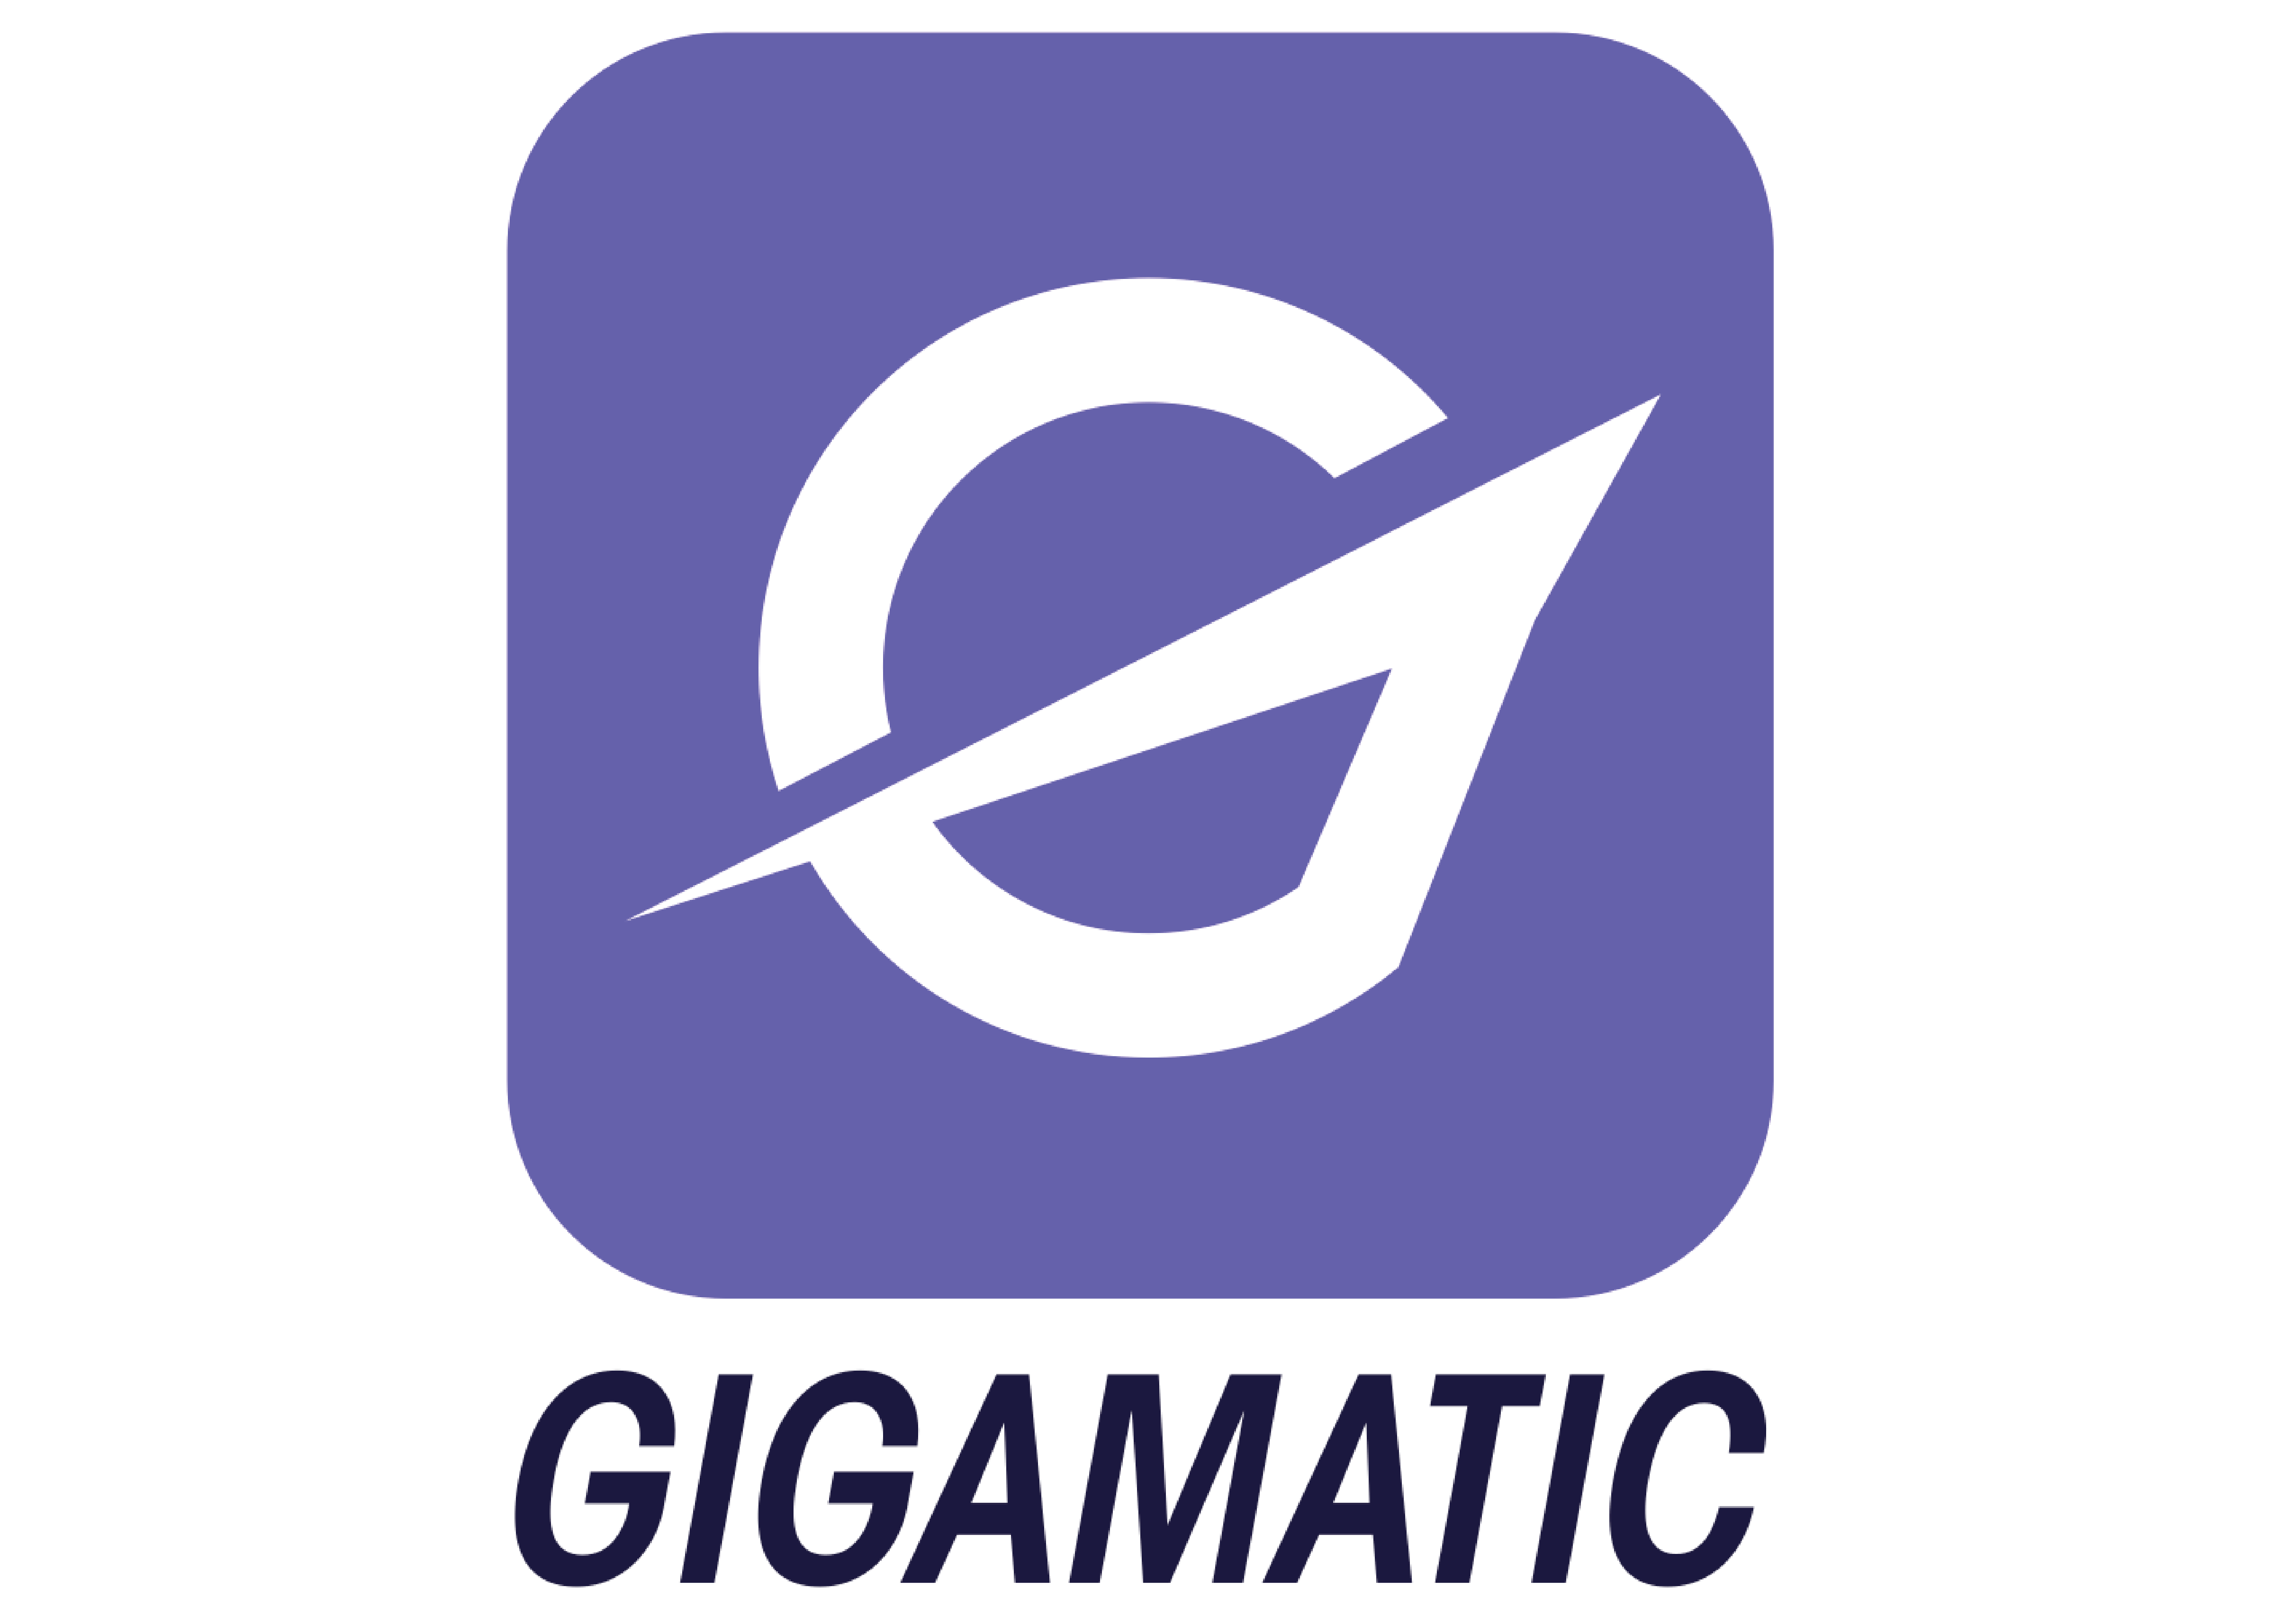 Gigamatic